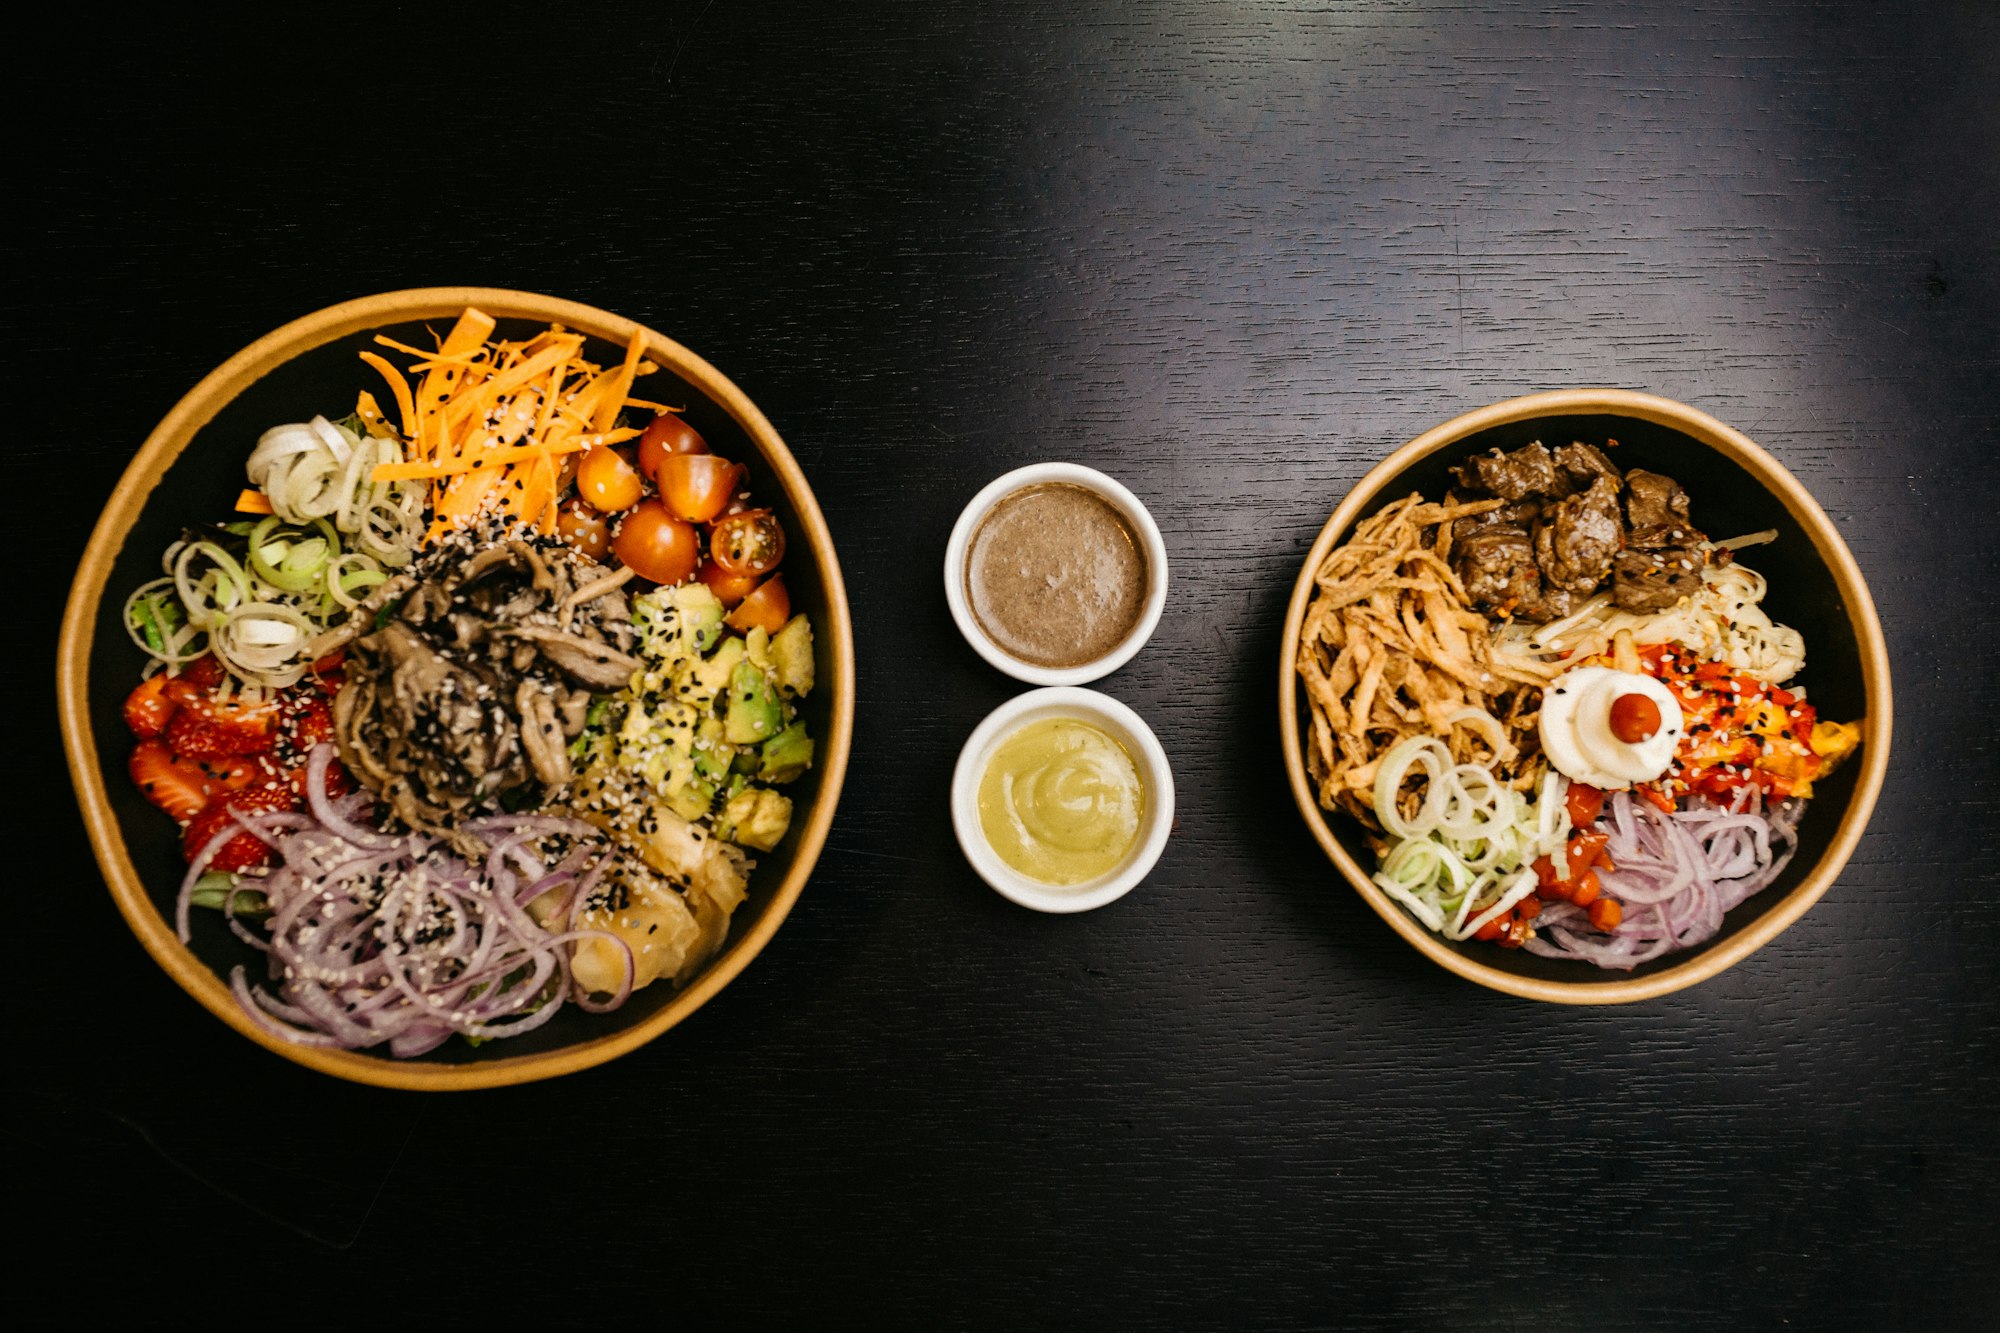 The Best Tastes of the Sea in a Bowl Just for Me: Top 5 Poke Bowls Around Silicon Valley